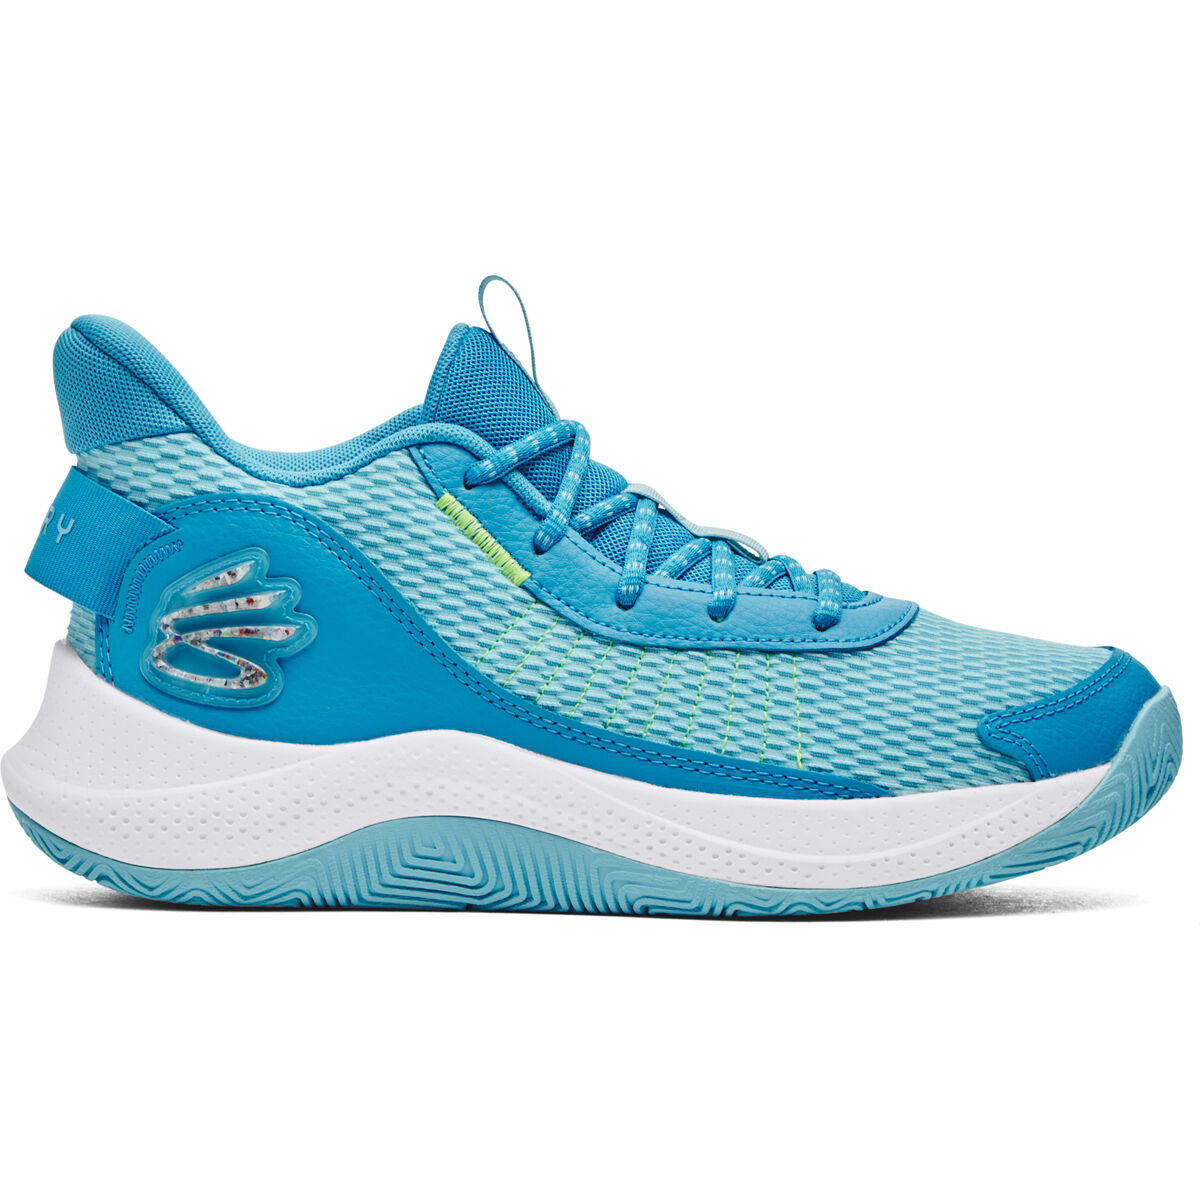 Under Armour Curry 3Z7 Basketball Shoes | Rebel Sport